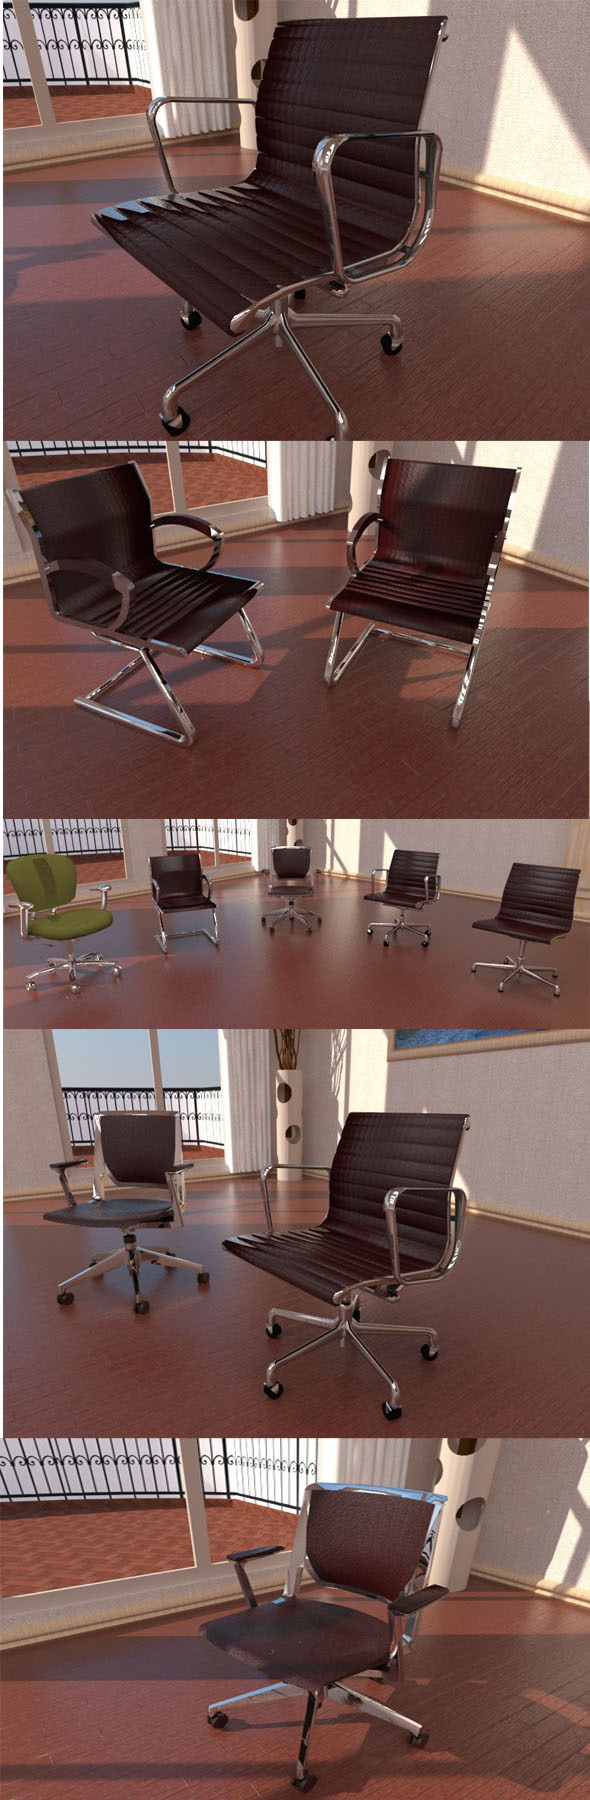 Office chairs collection - 3Docean 13041618